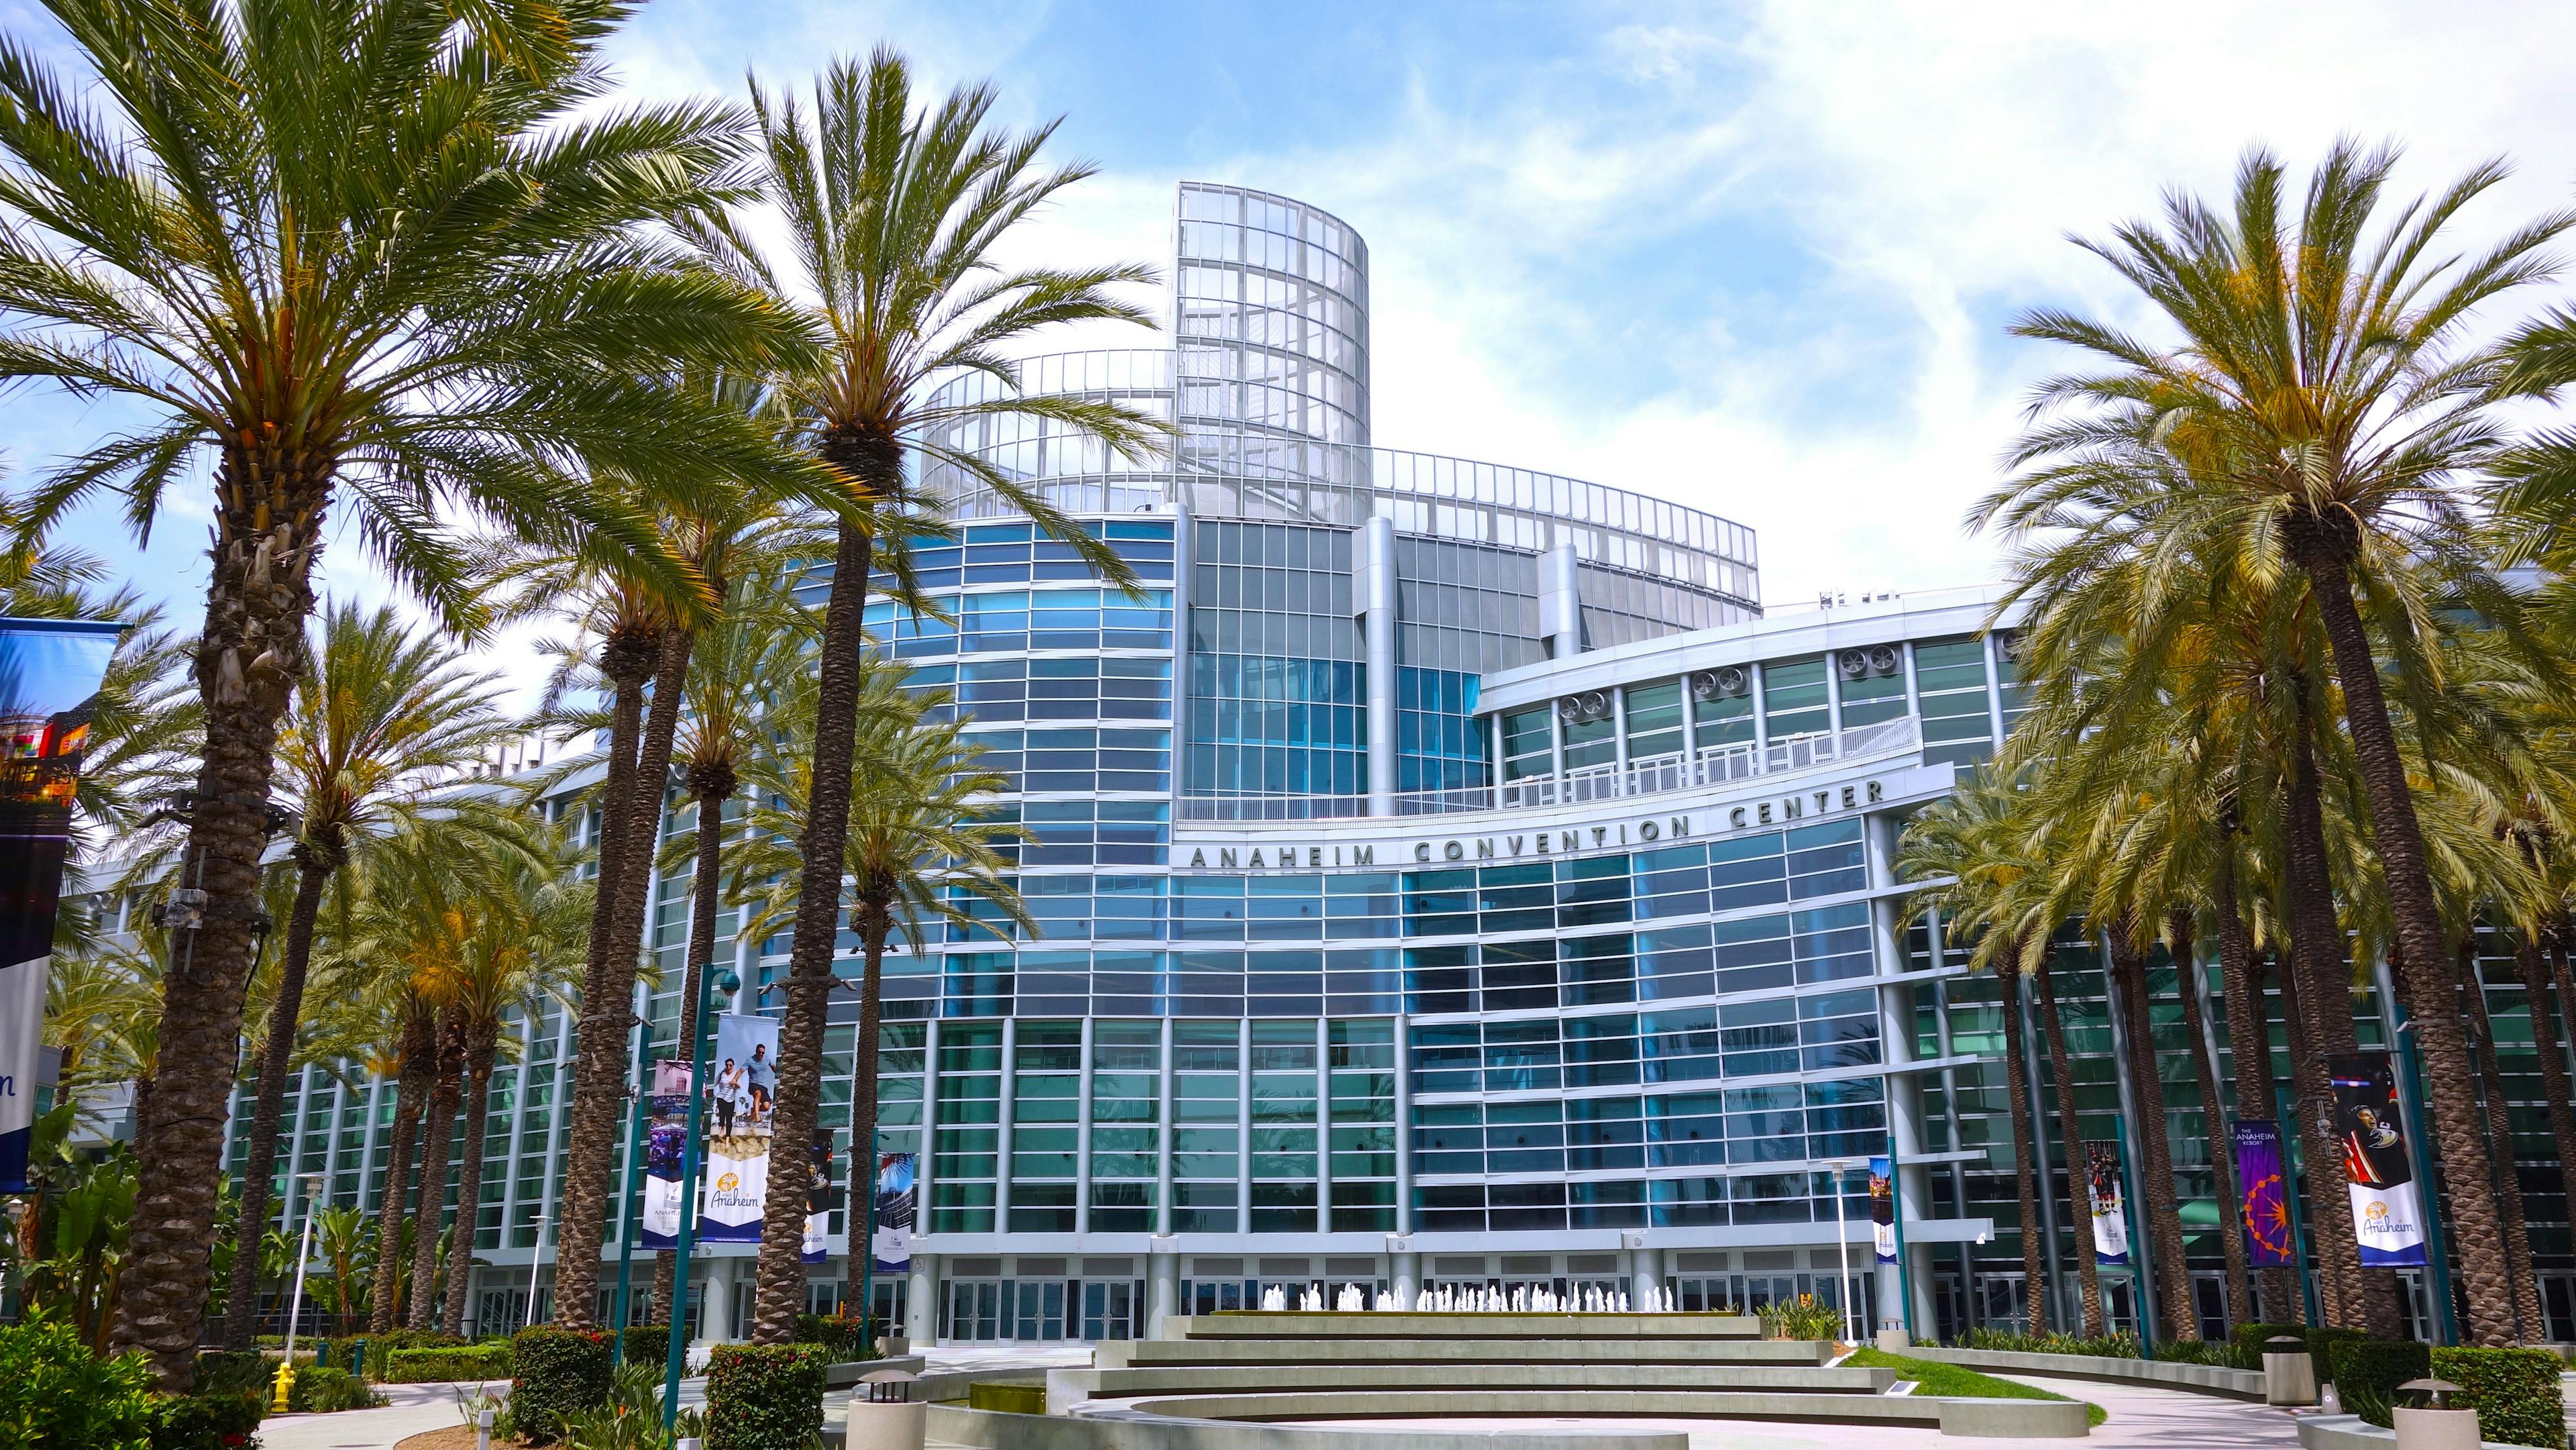 Wide shot of the Anaheim Convention Center with palm trees and fountain. Photo taken July 22, 2019 in Anaheim, CA / USA. | Image Credit: © Simone - stock.adobe.com